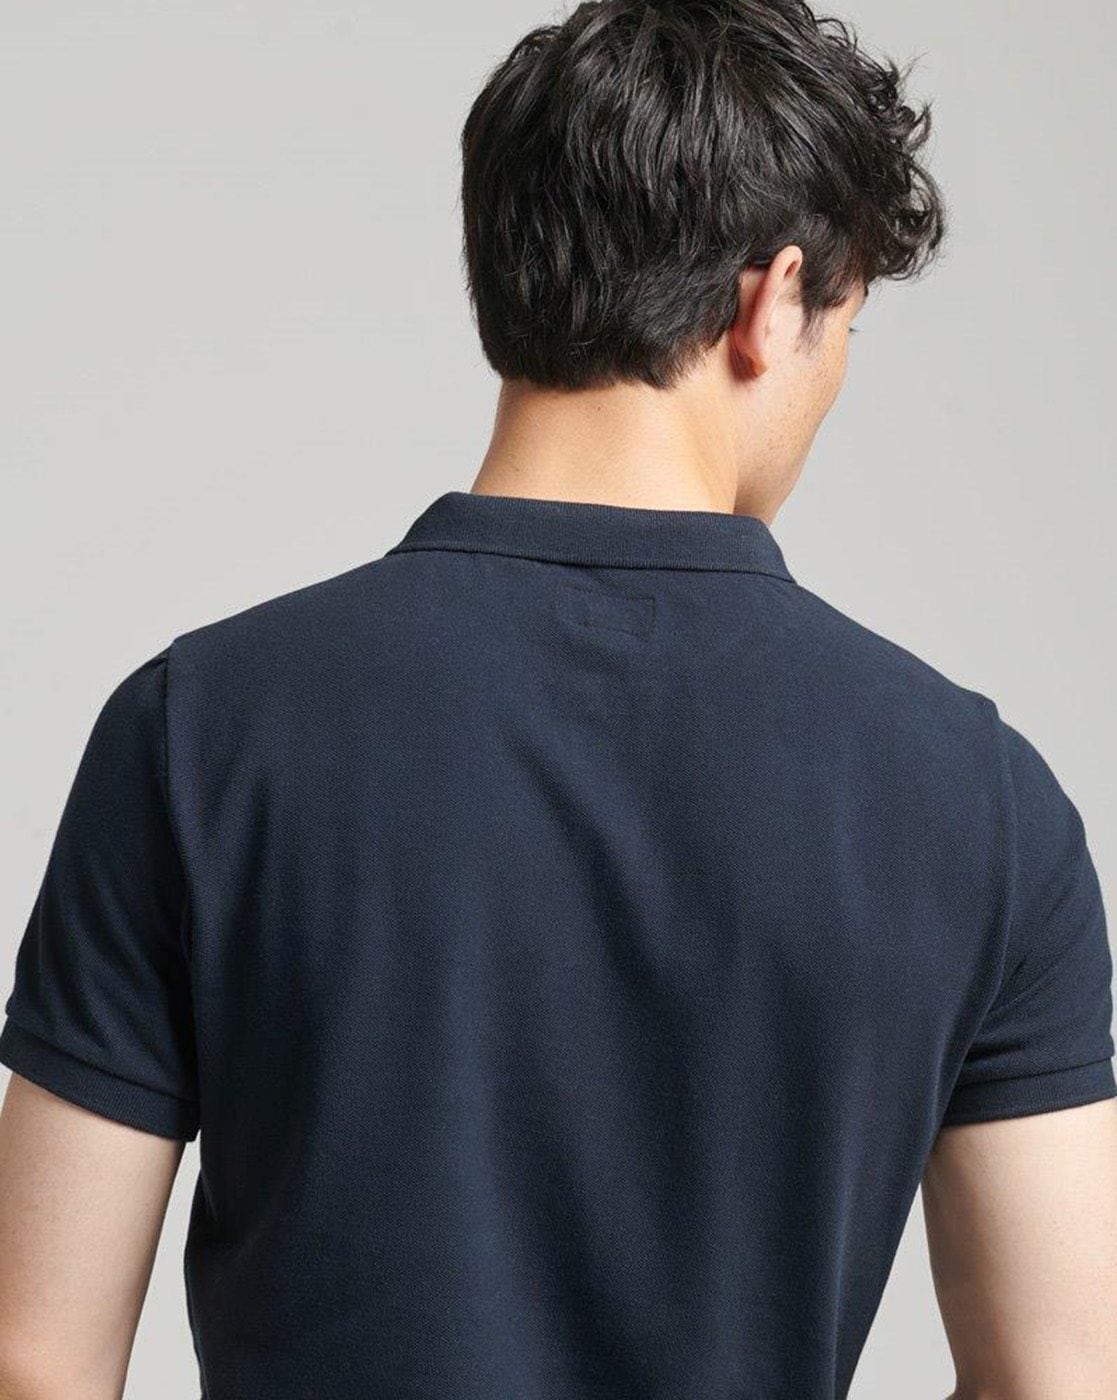 Online Buy Tshirts Men for Eclipse Navy by SUPERDRY